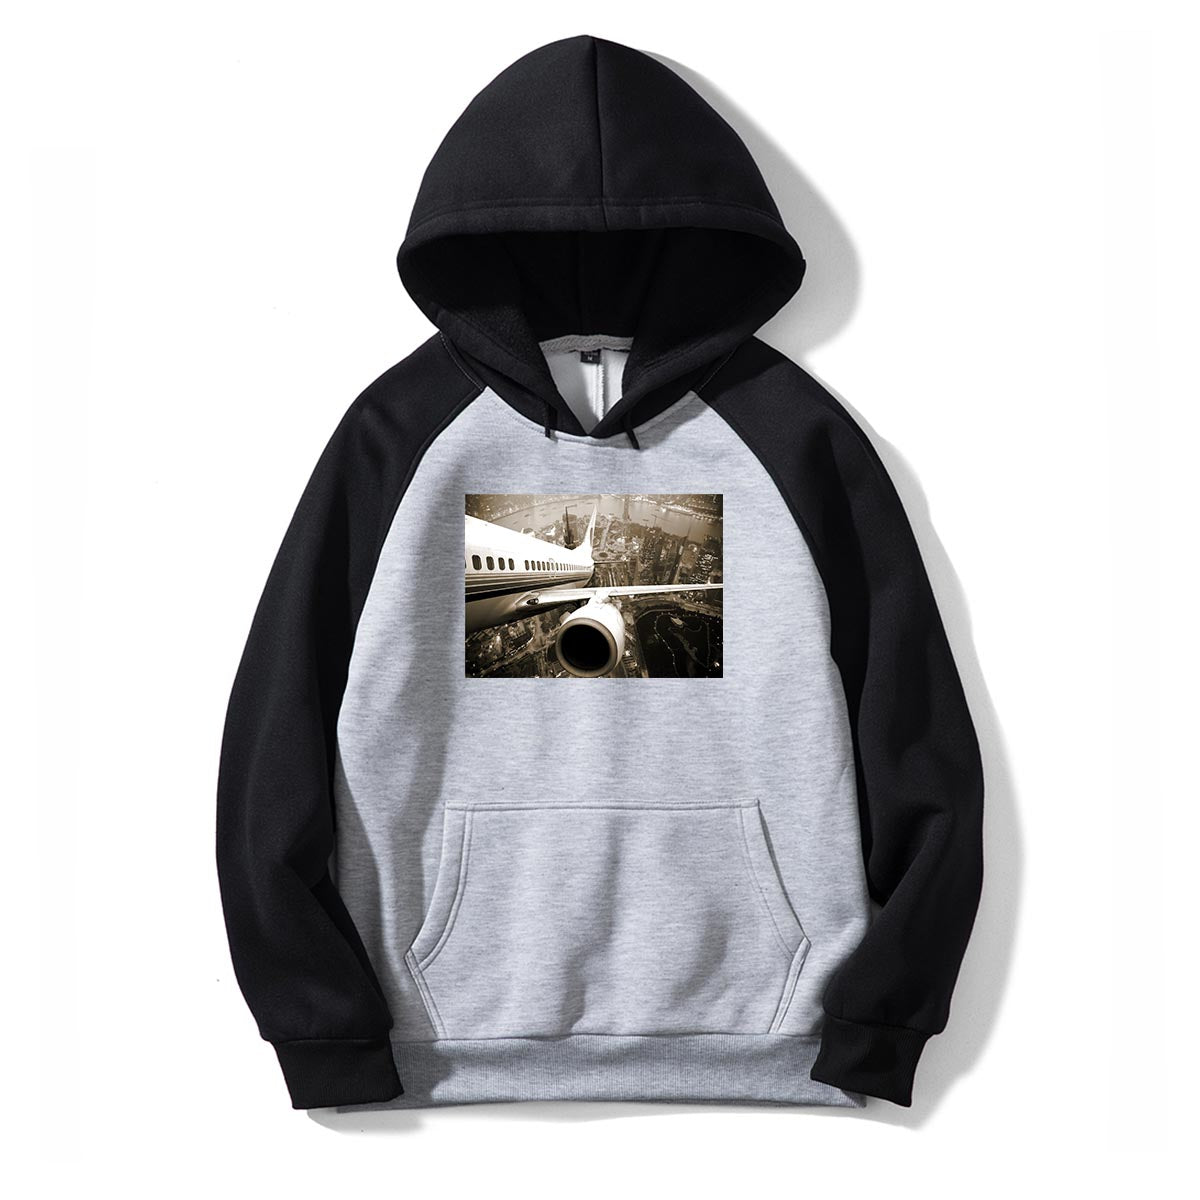 Departing Aircraft & City Scene behind Designed Colourful Hoodies